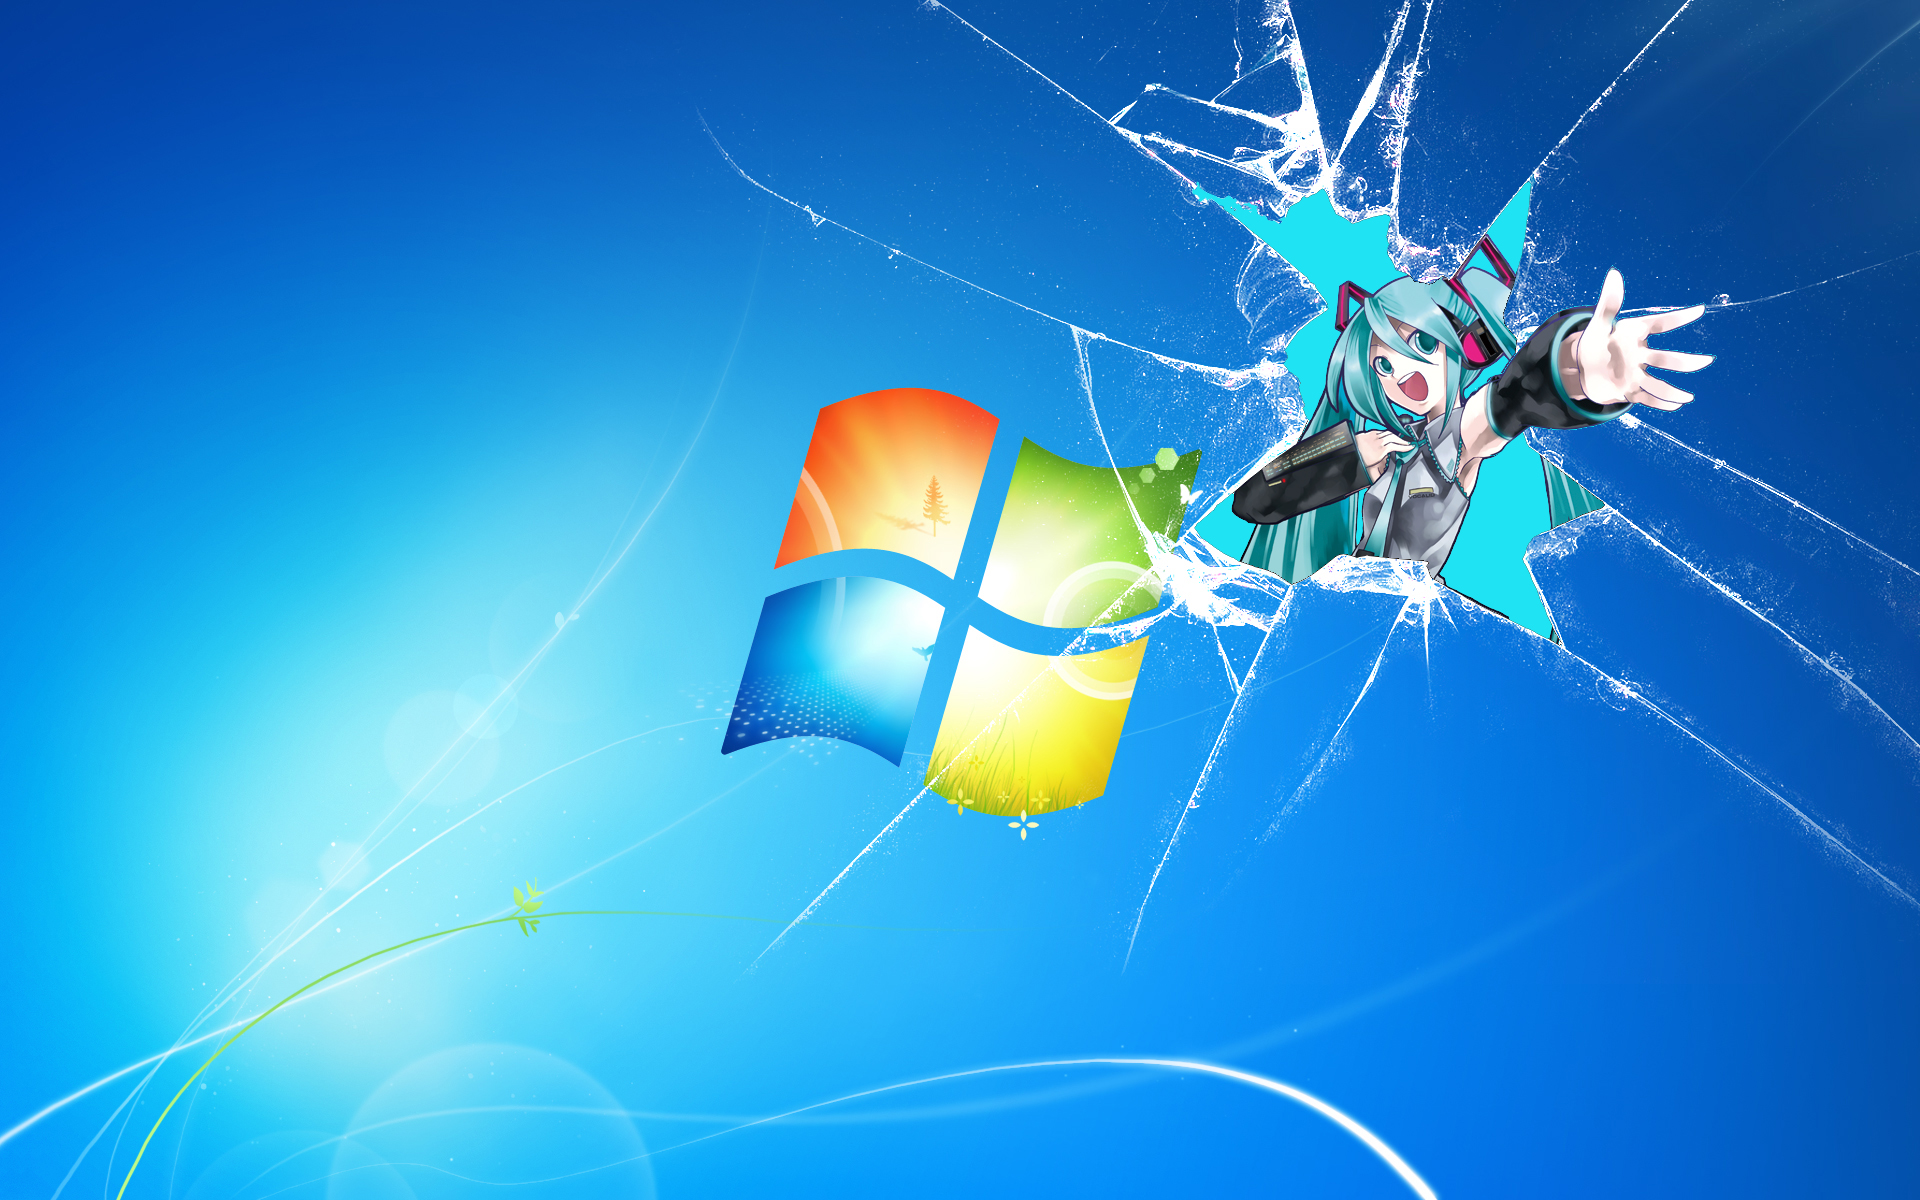 hatsune miku wallpaper,graphic design,graphics,operating system,animation,fictional character